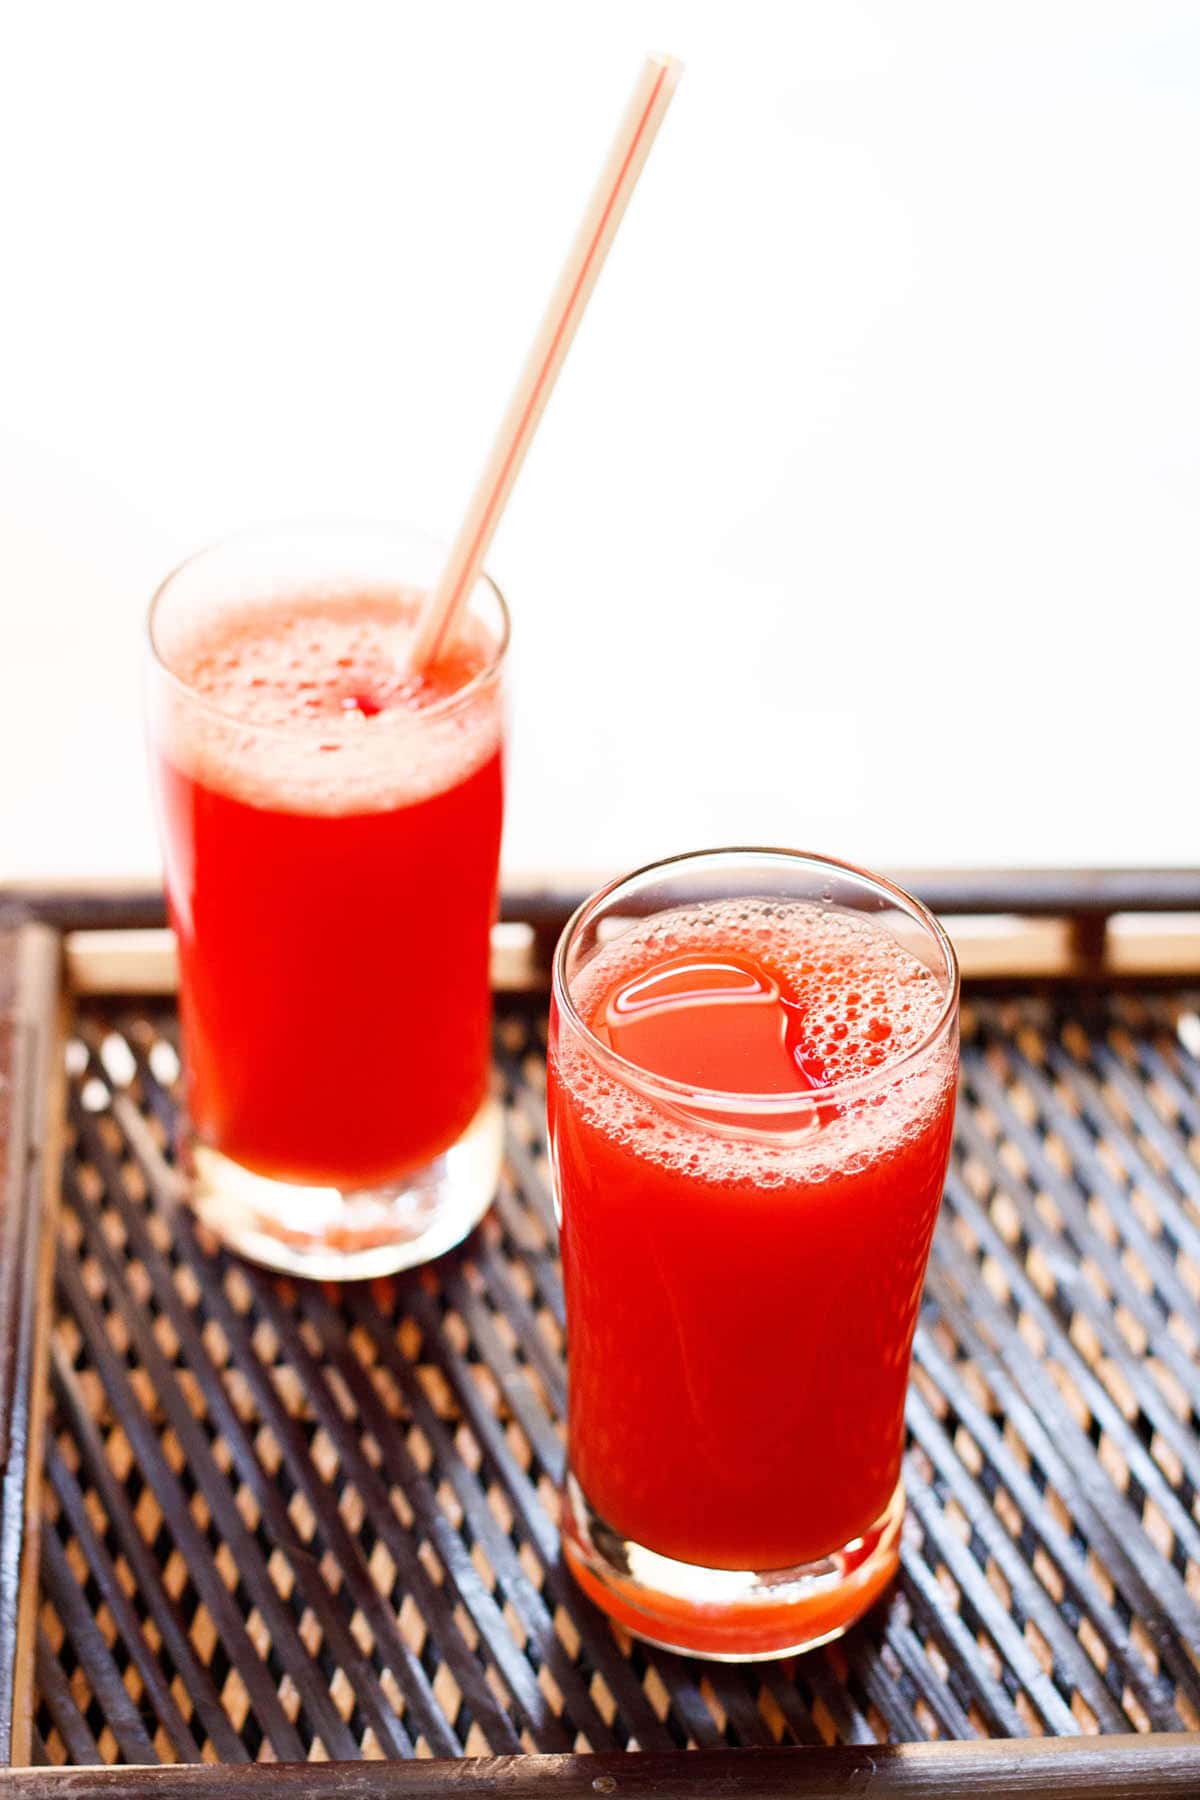 agua fresca served in glasses on a dark woven bamboo tray